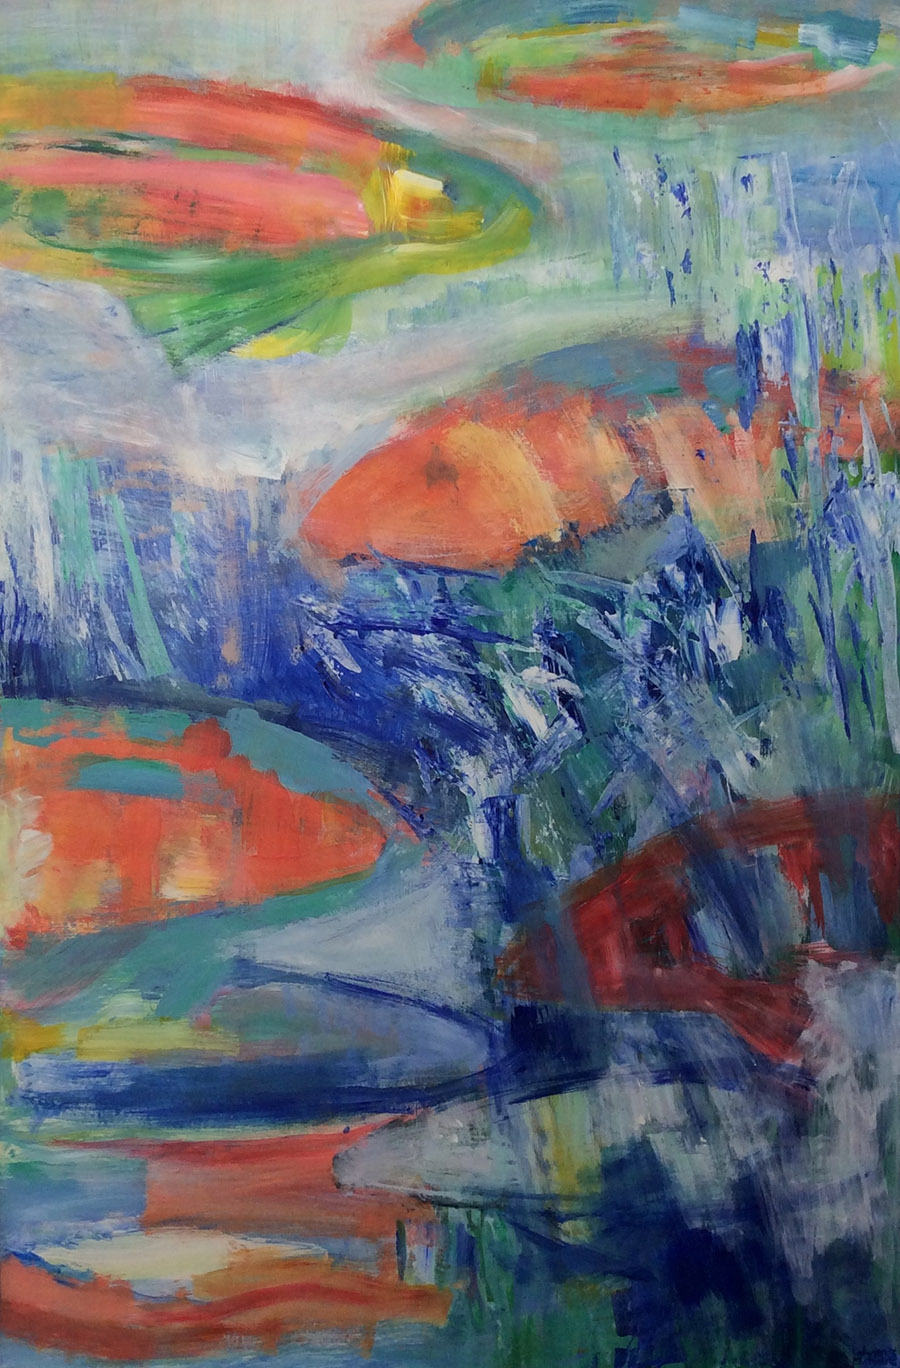 Fishes Passing by, 2007, acrylic on paper, 90 x 60 cm